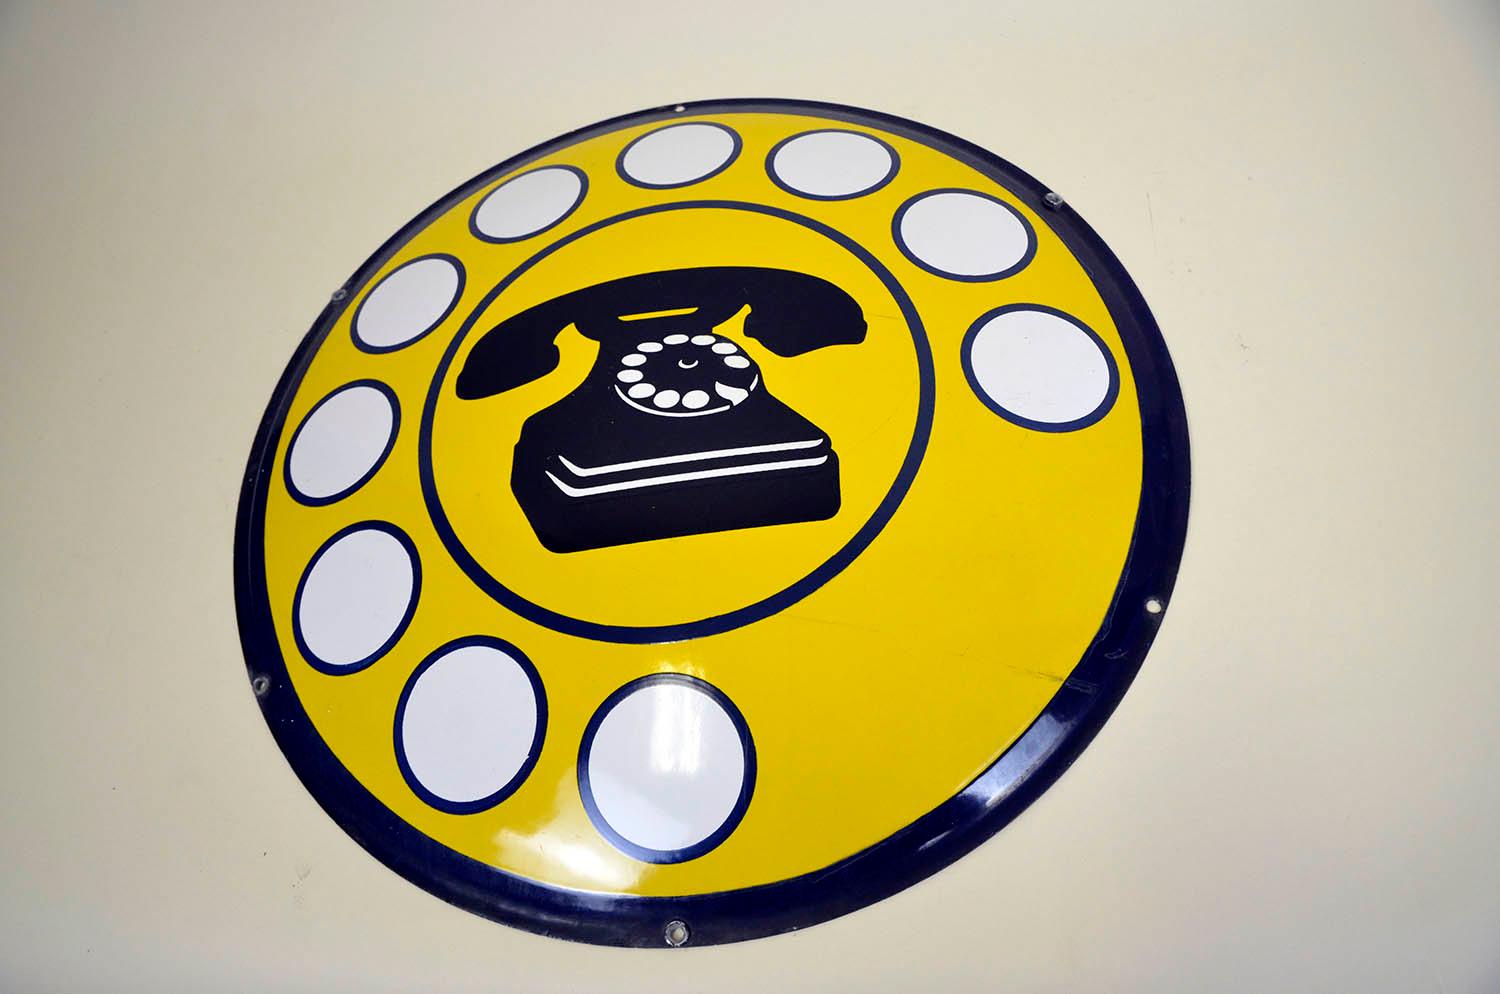 Late 20th Century 1970s Yellow Curved Enamel Metal Vintage Italian Telephone Sign, Sip